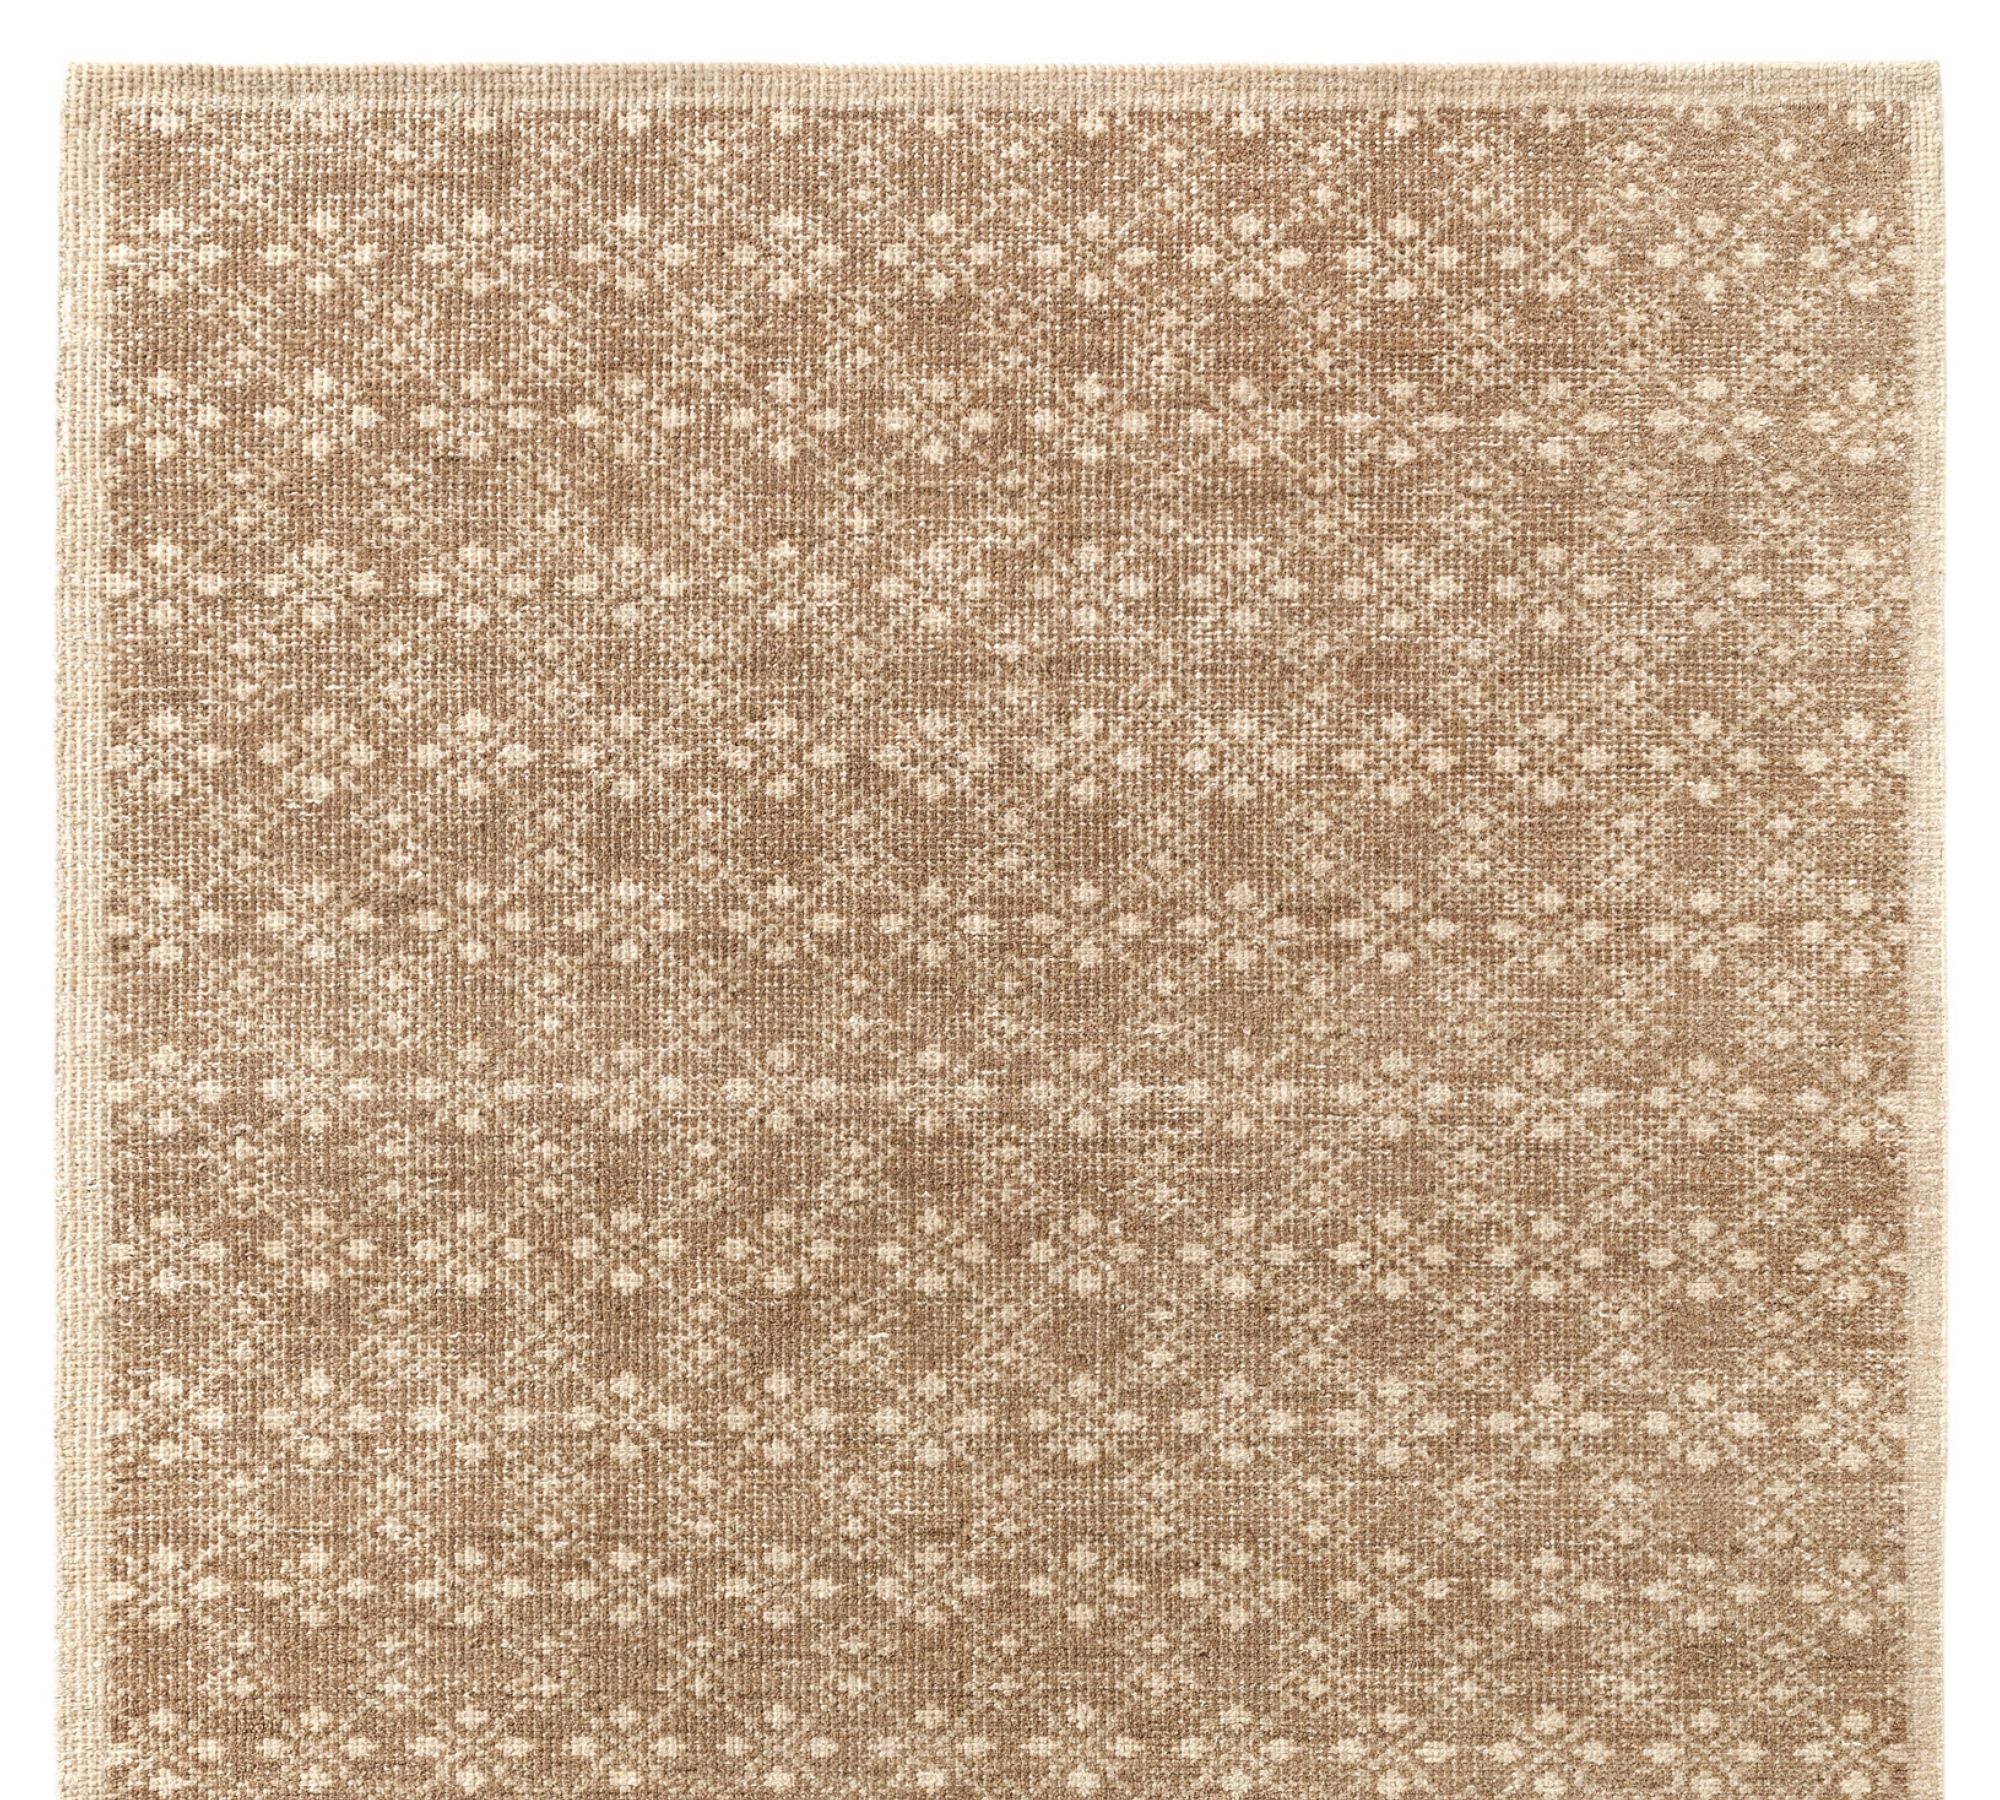 Kendall Rug Swatch  - Free Returns Within 30 Days